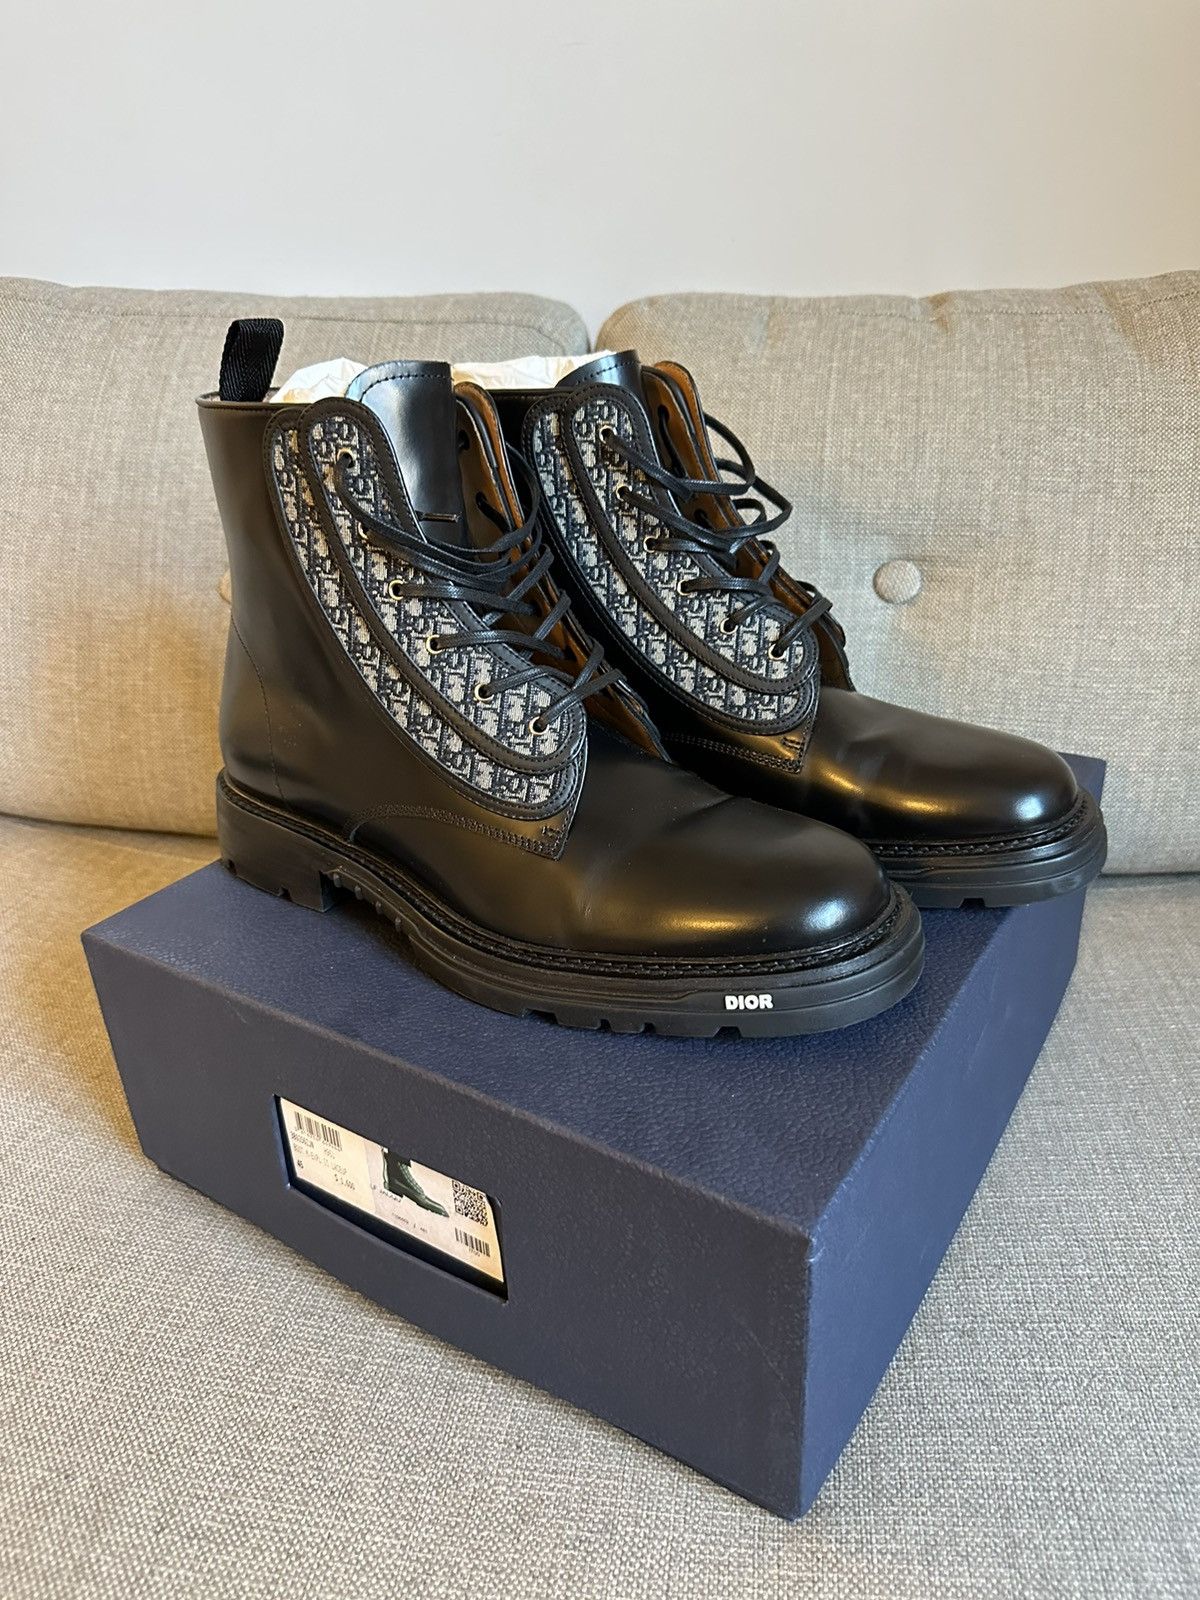 Dior, Shoes, Dior Homme Explorer Ii Lace Up Boots